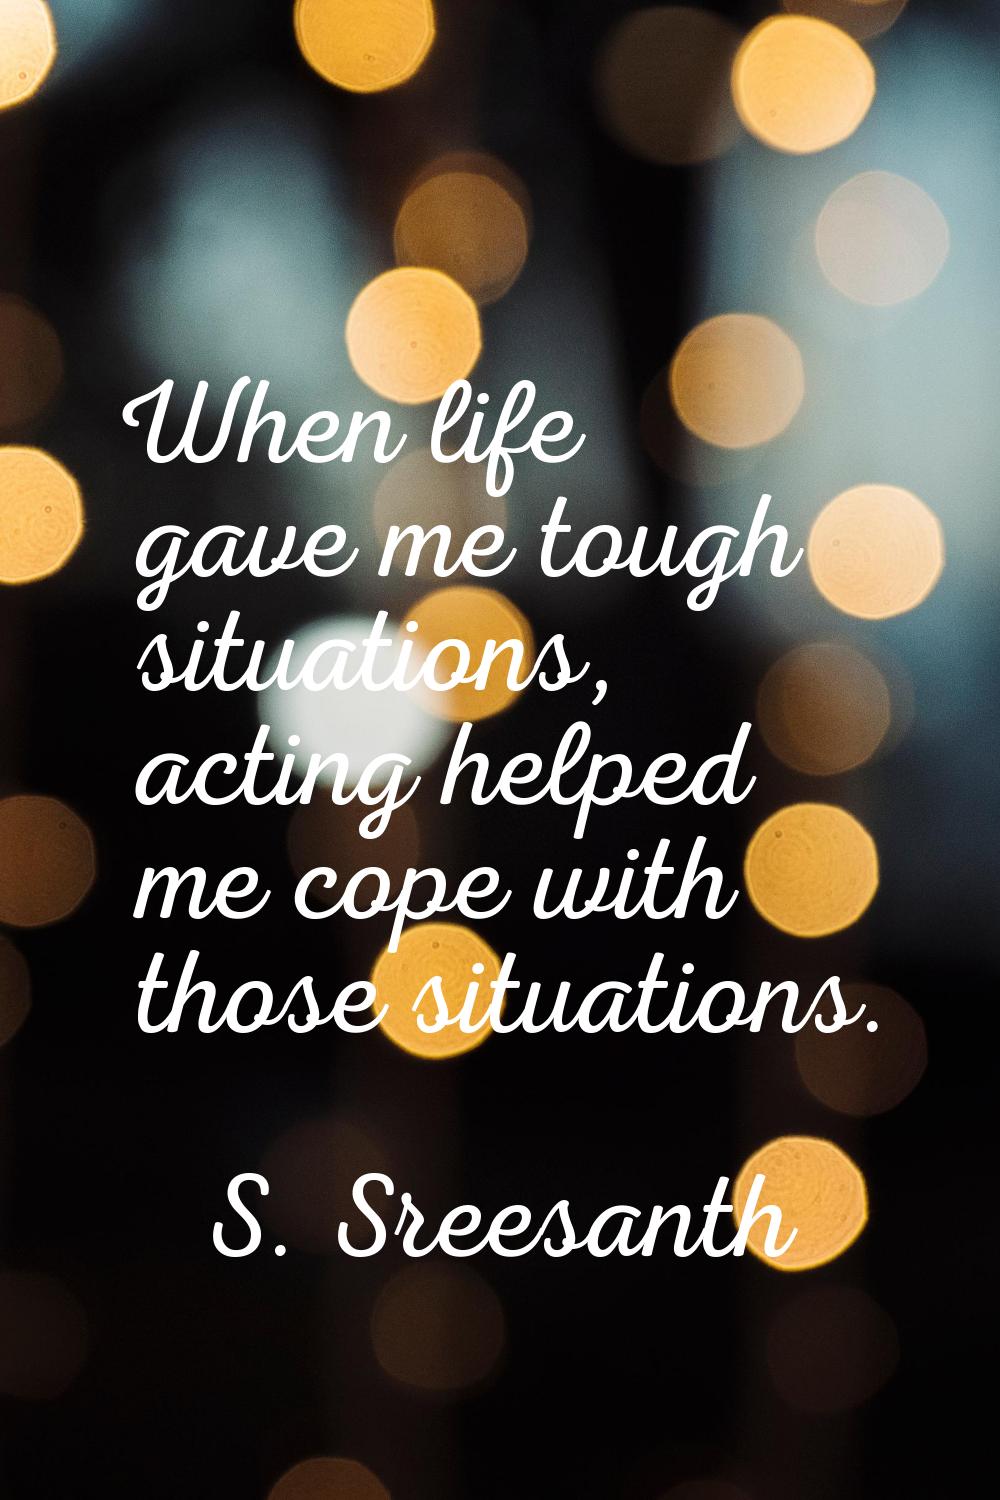 When life gave me tough situations, acting helped me cope with those situations.